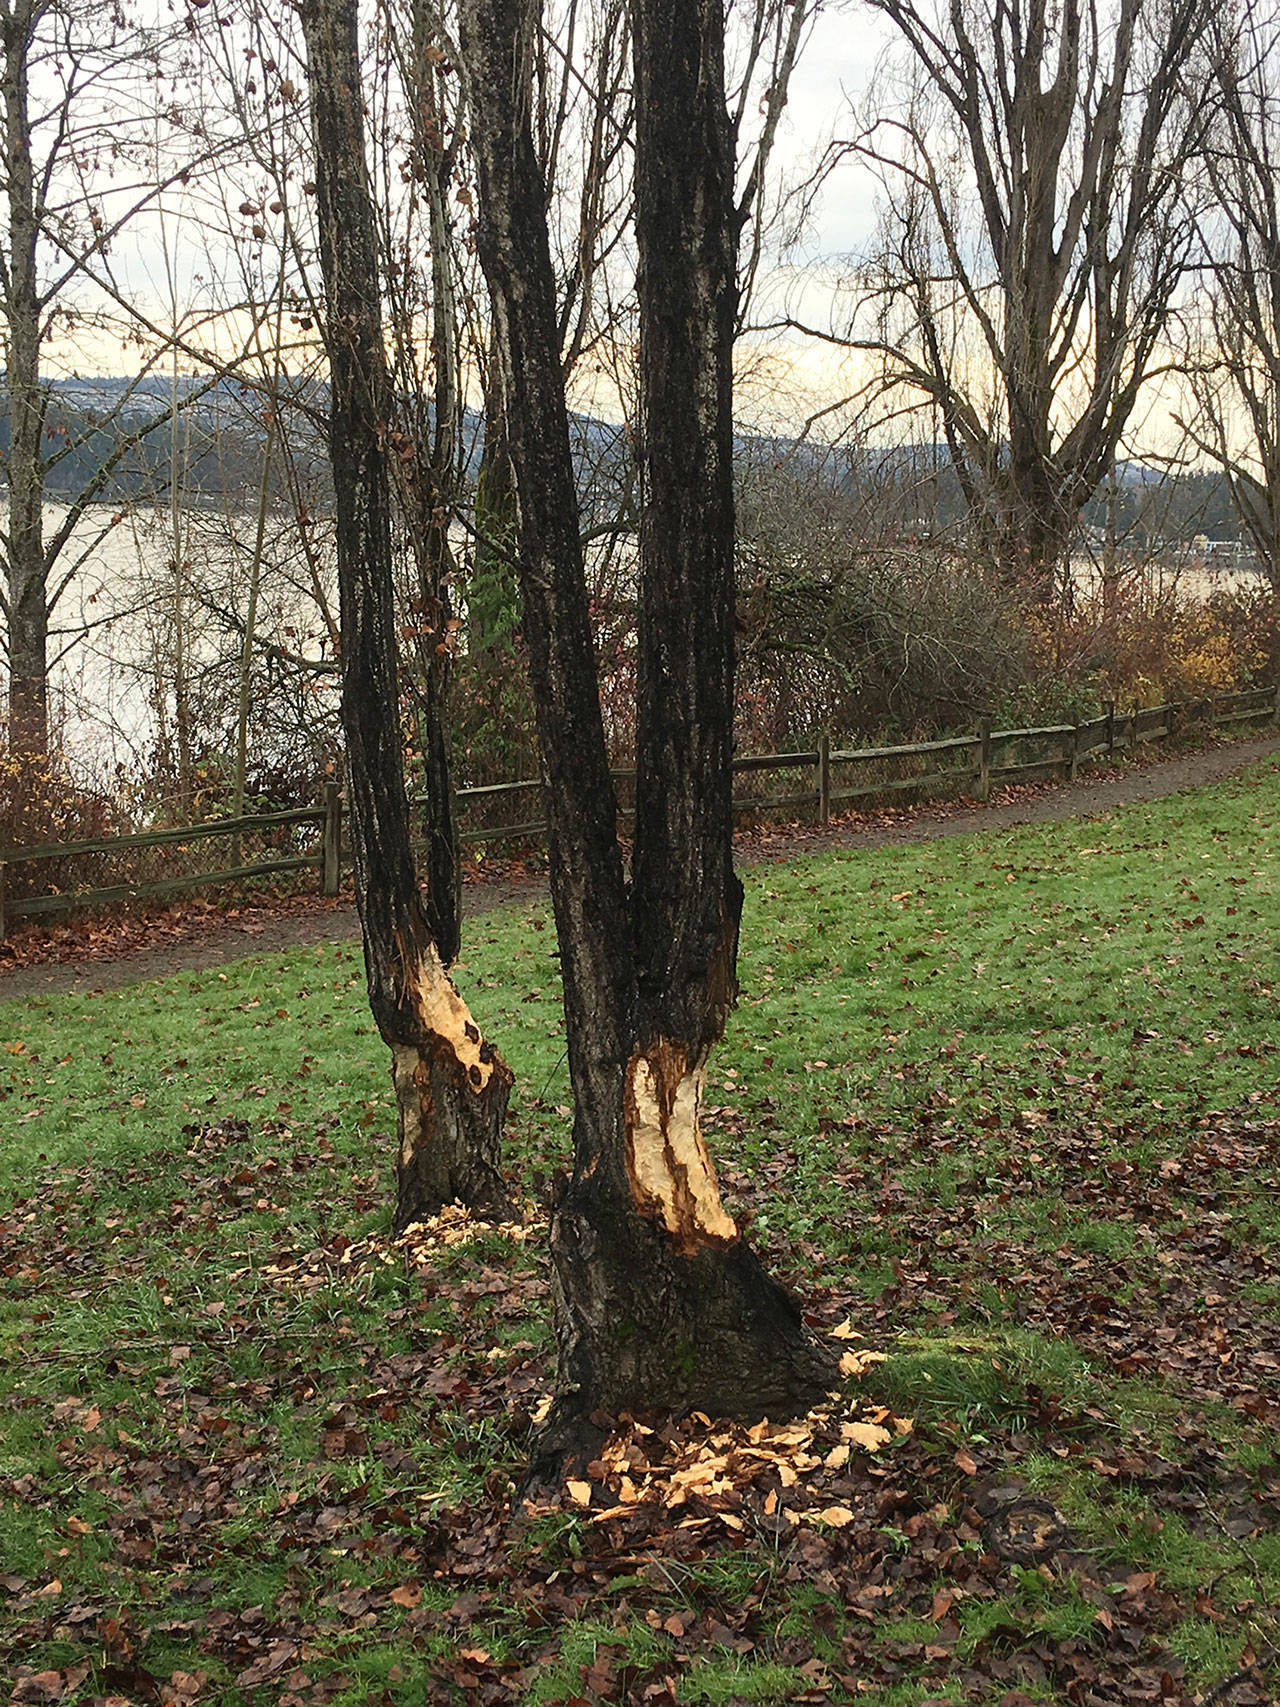 Beaver activity was noticed at Luther Burbank Park last month. Photo courtesy of An Tootill